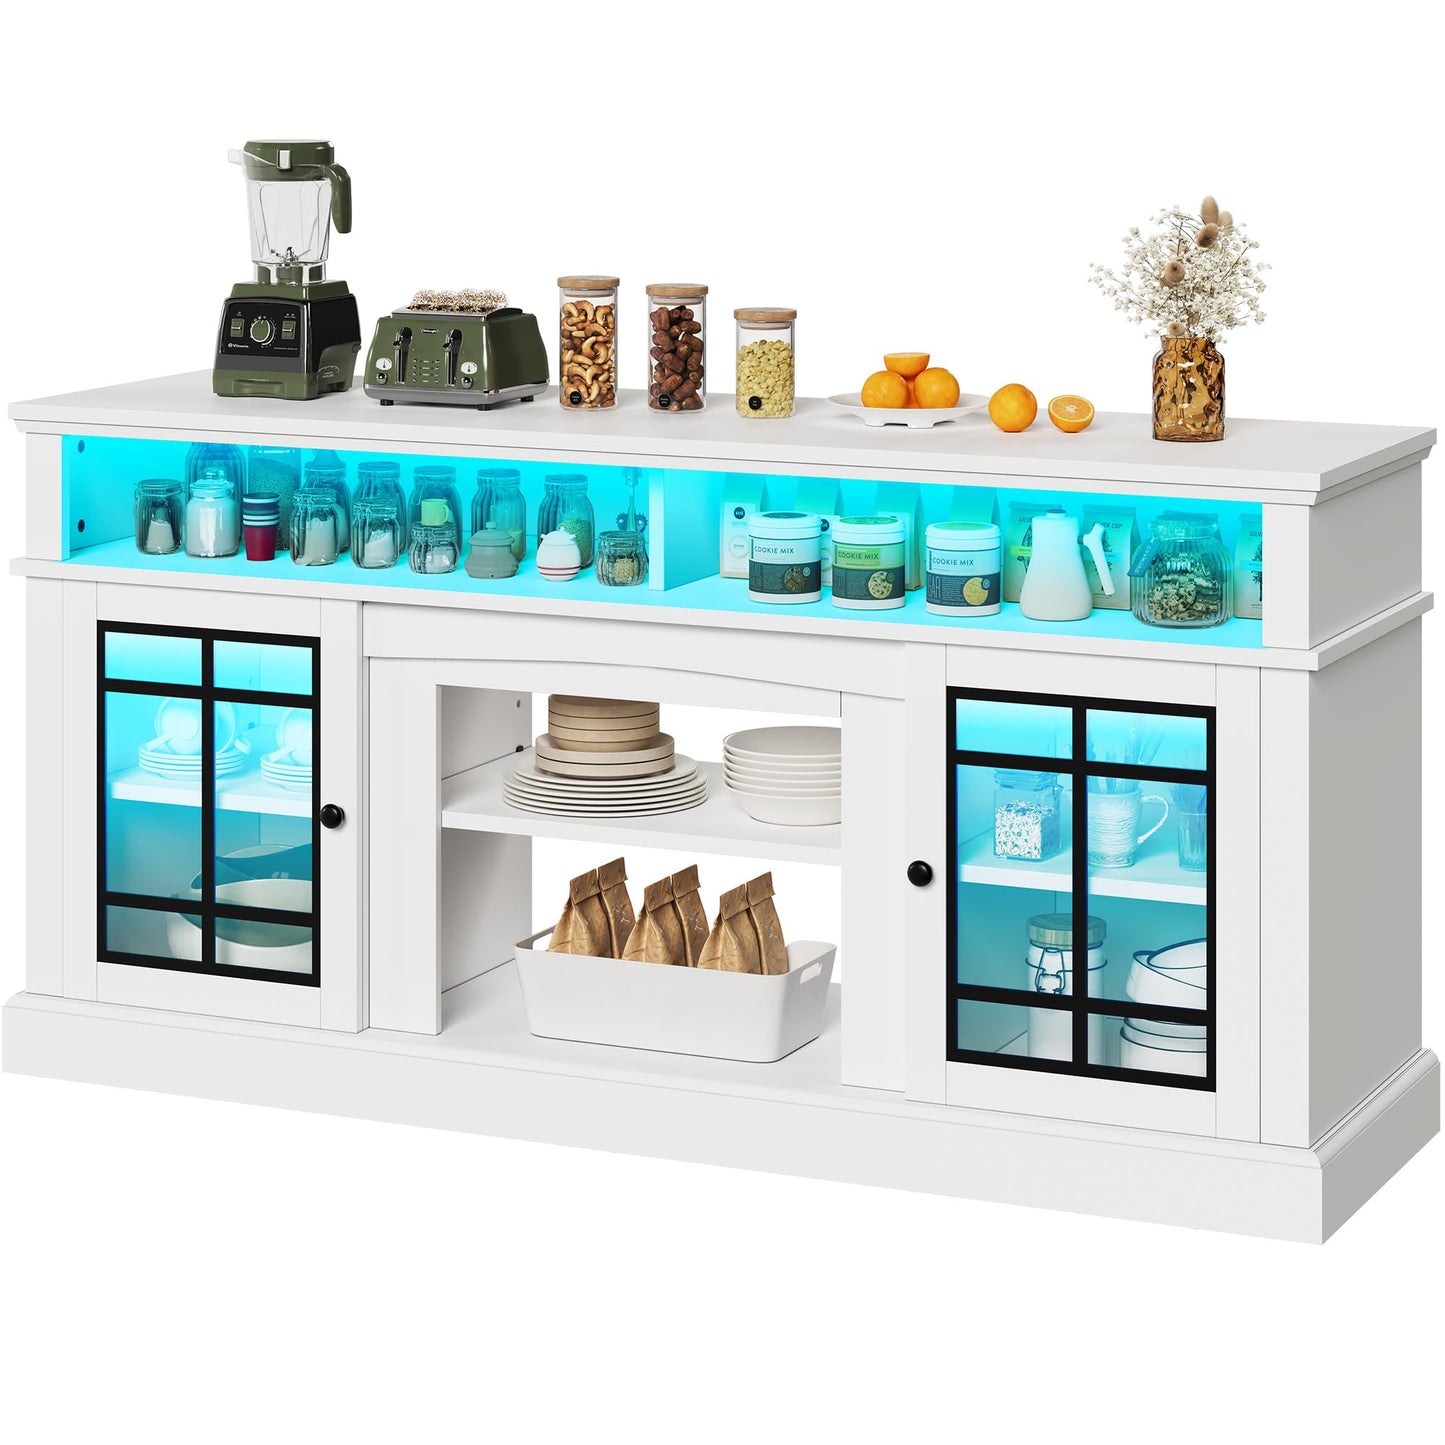 YITAHOME Farmhouse Sideboard Buffet Cabinet with LED Light, 65'' Large Kitchen Cabinet w/Storage, Tempered Glass Doors, Adjustable Shelf, 32'' Tall Coffee Bar Table for Living Room, Dining Room, White